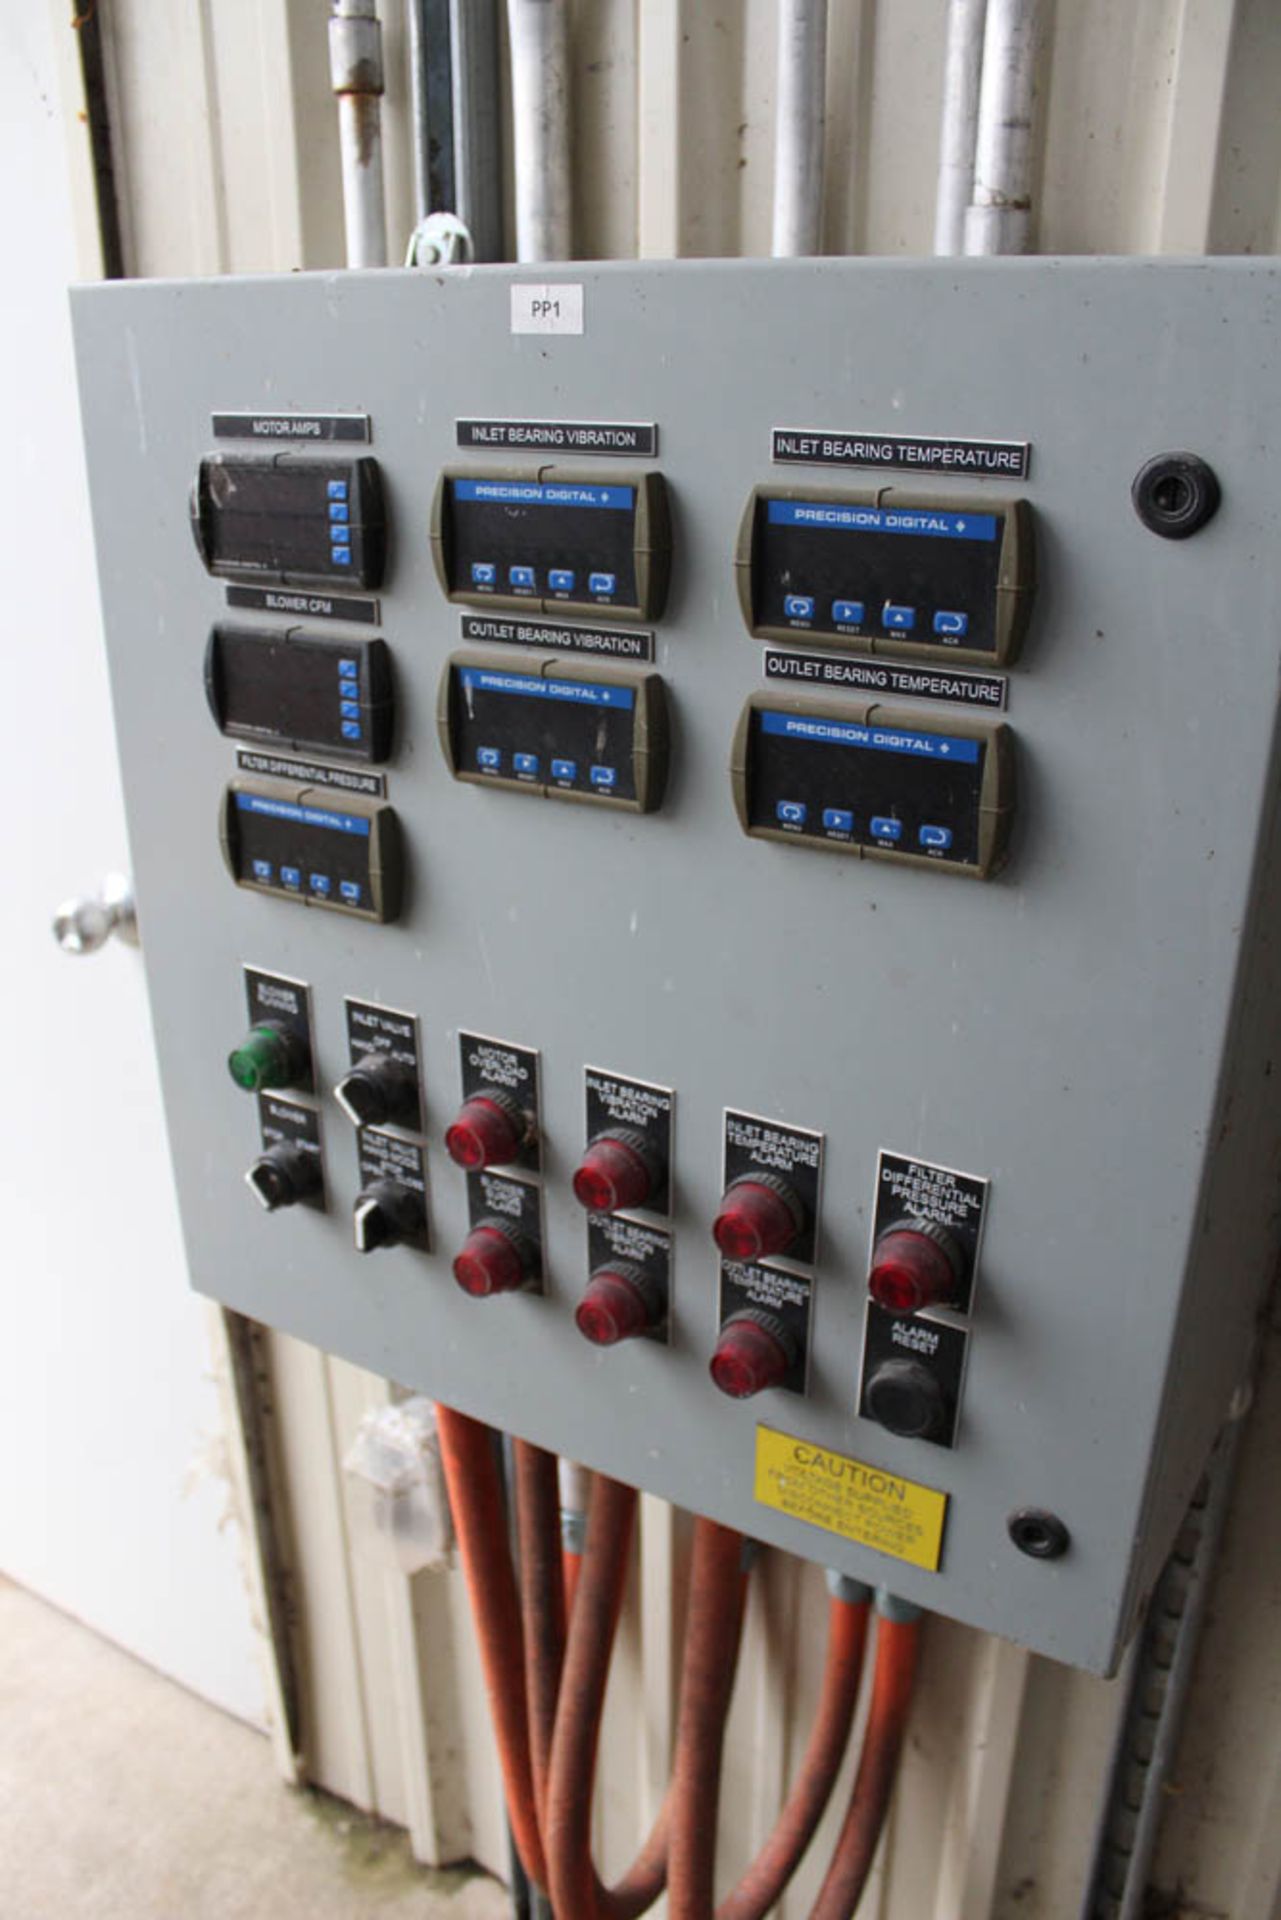 Lot of 4 Mild Steel Painted Control Cabinets with Precision Digital Controllers - Image 3 of 4